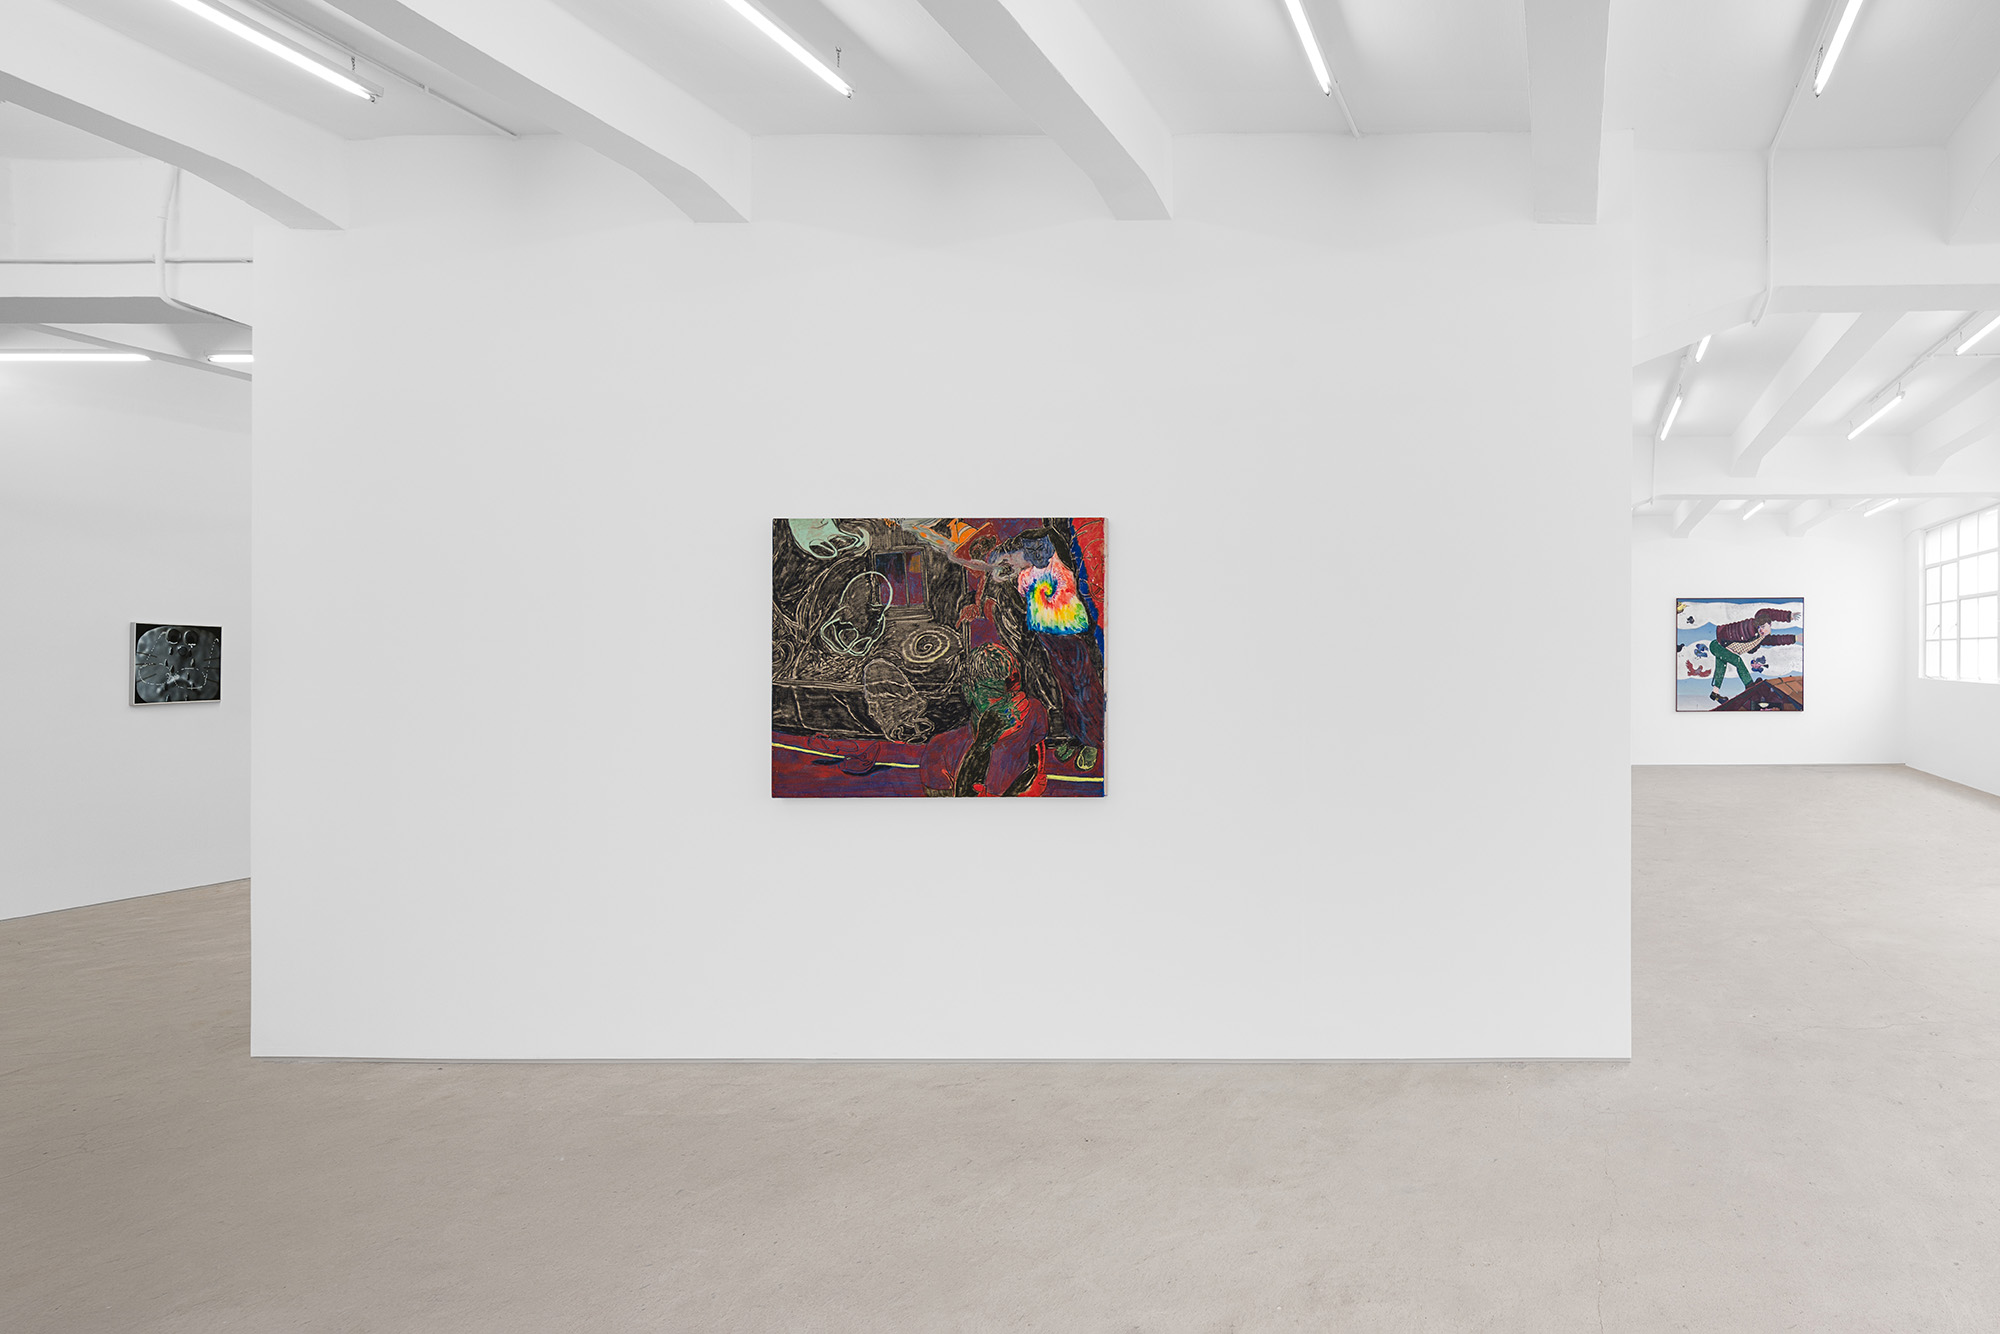 Installation view of group exhibition, Vacation II, at Gallery Vacancy, featuring works by Henry Curchod, Pieter Jennes, and Rao Weiyi.